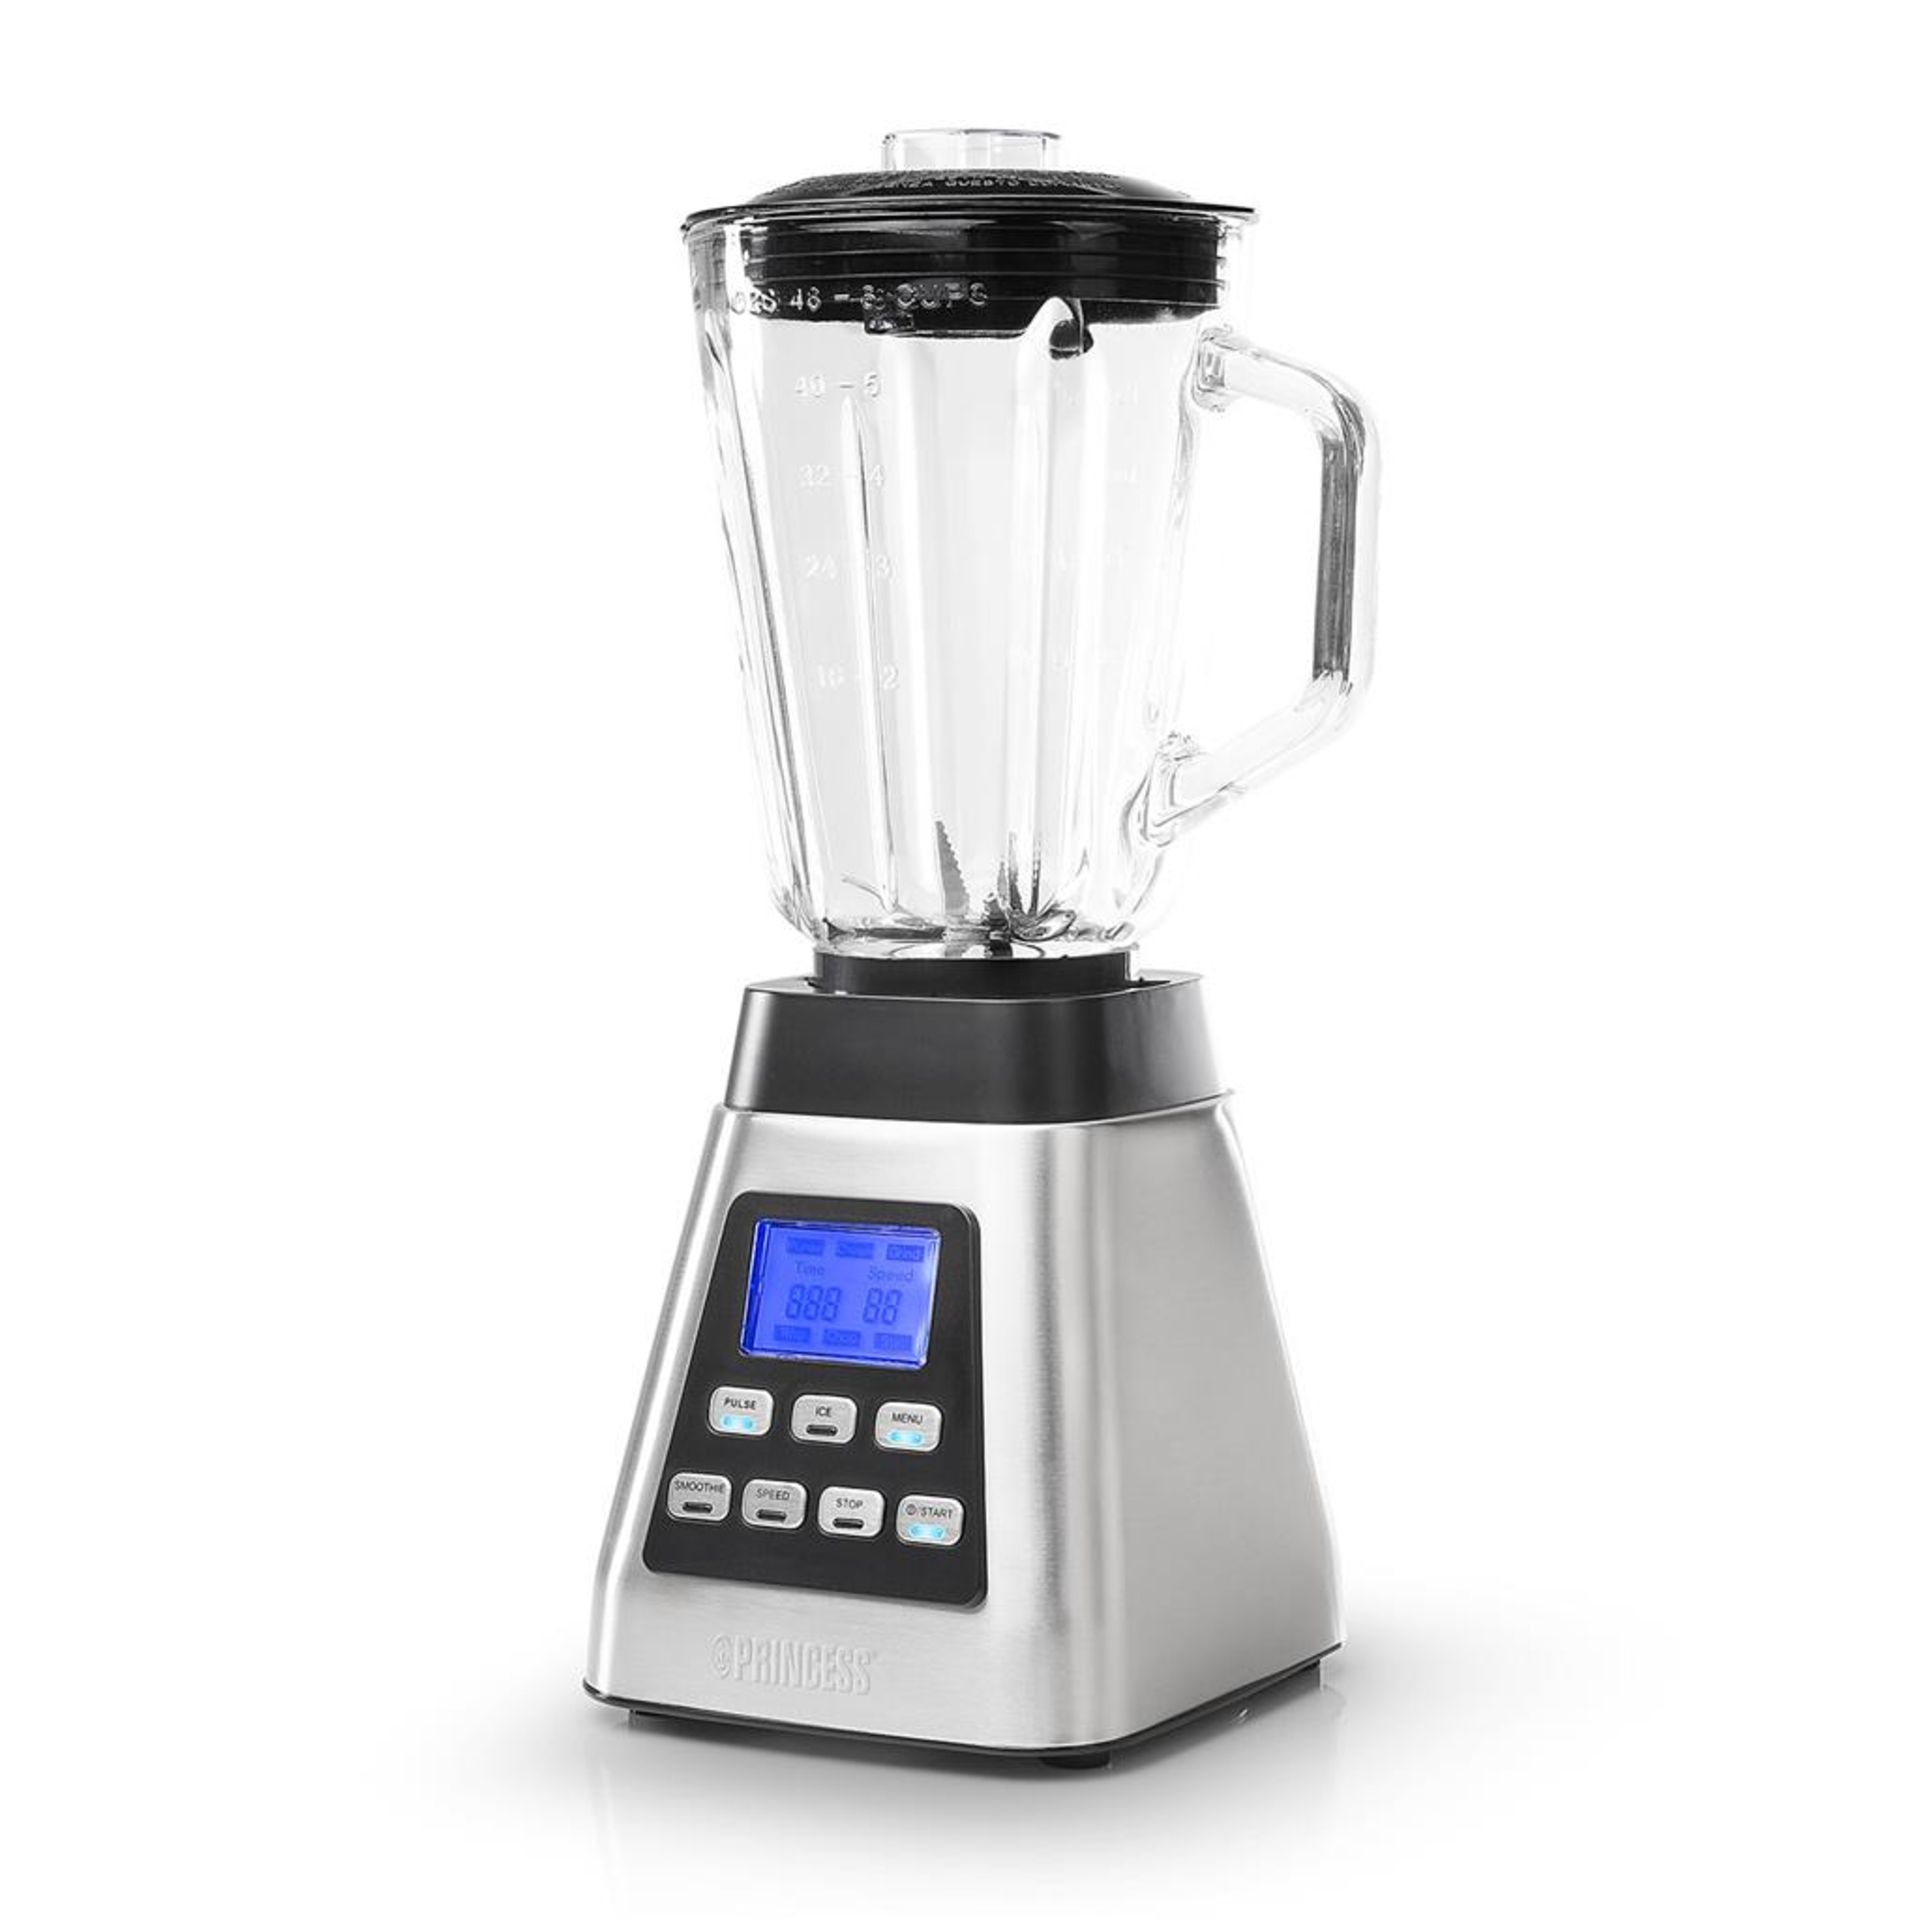 Princess Blender Power Deluxe. - P5. The luxurious Princess 212071 Power Blender makes blending fast